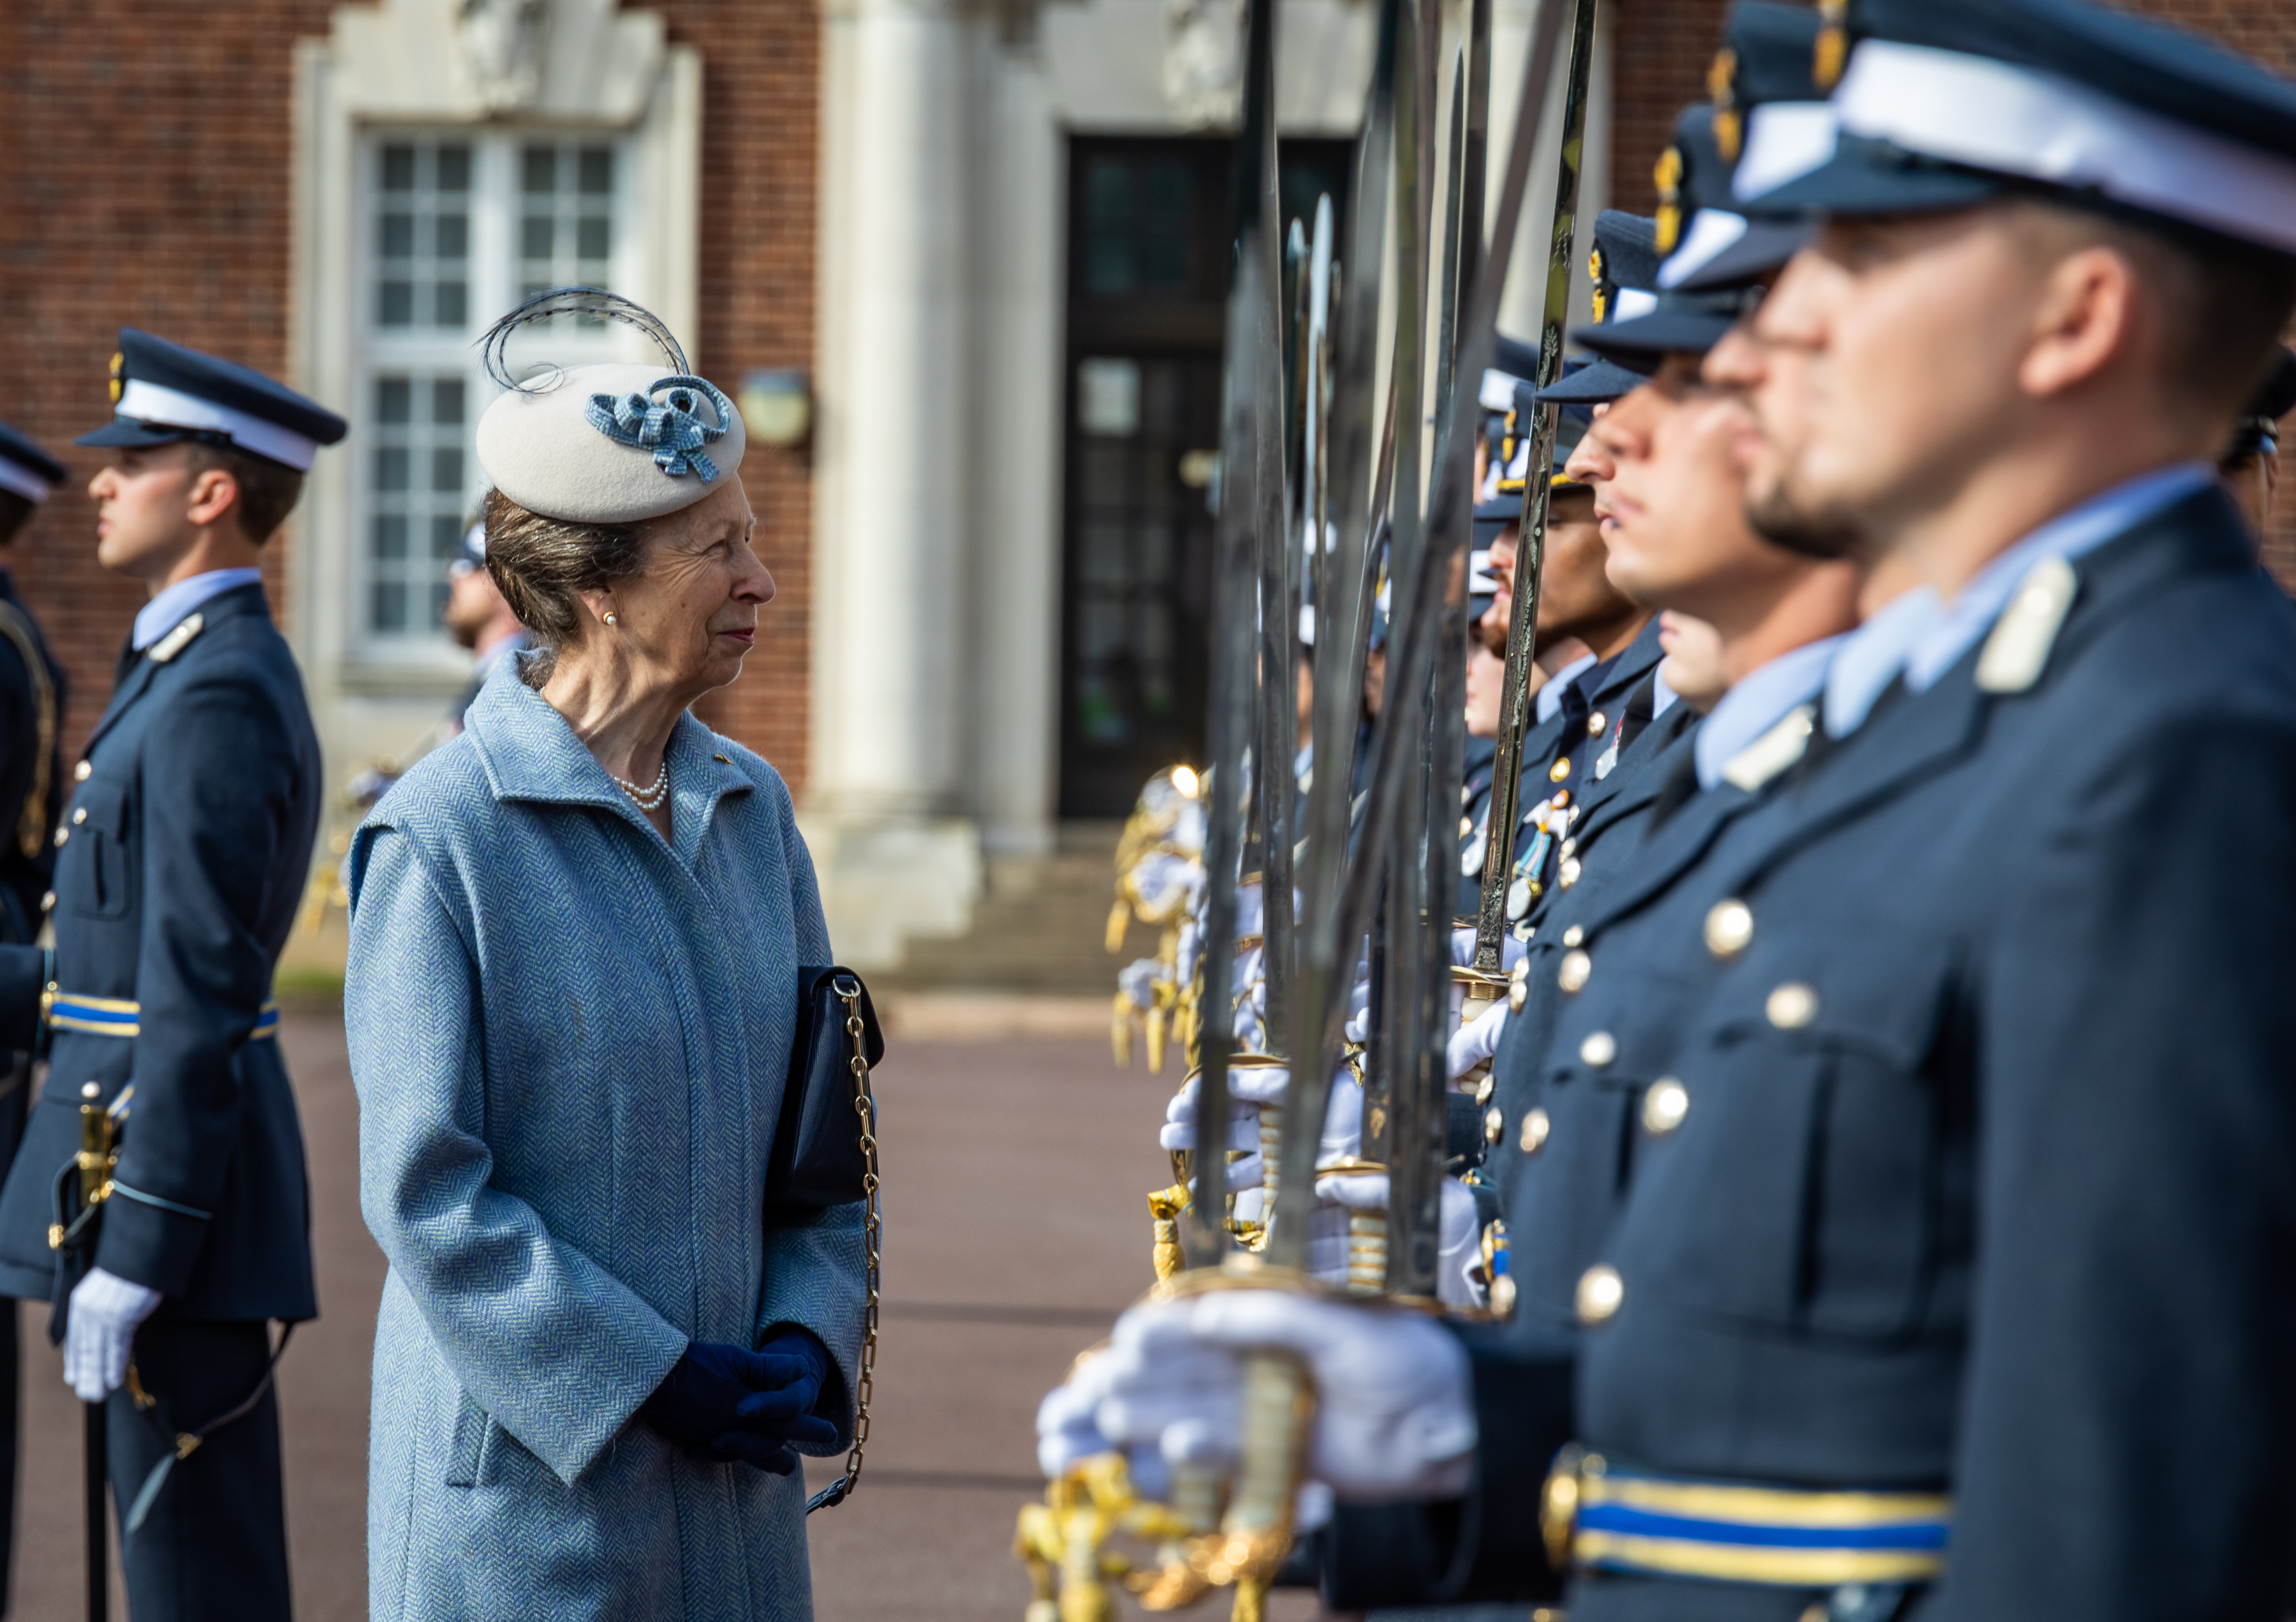 Her Royal Highness talks to personnel.